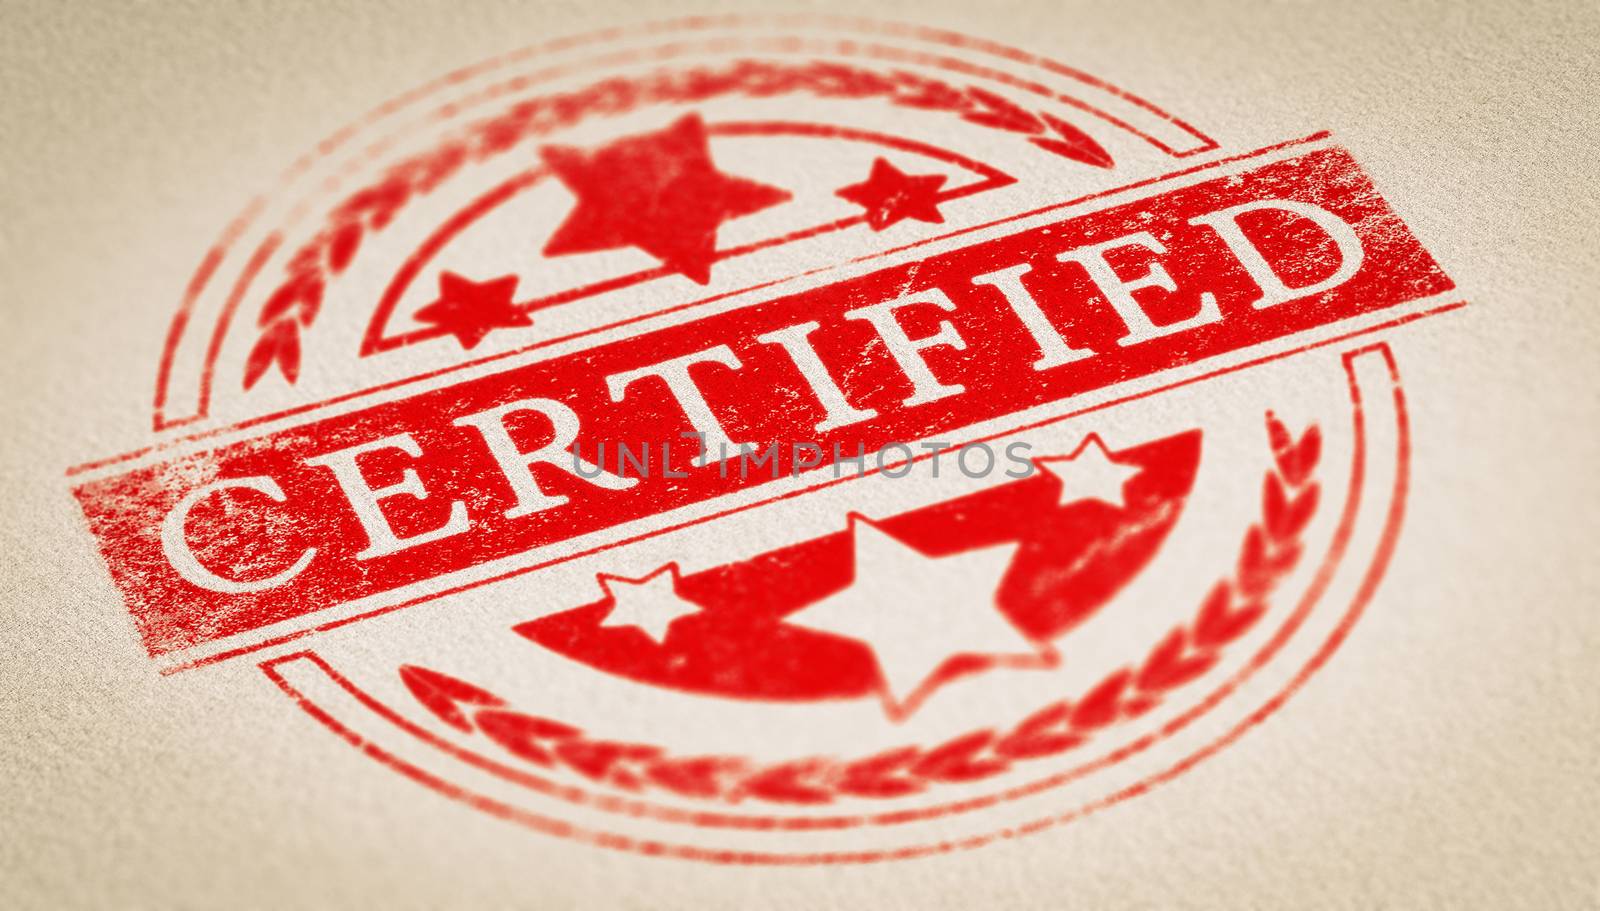 Authenticity Certificate by Olivier-Le-Moal